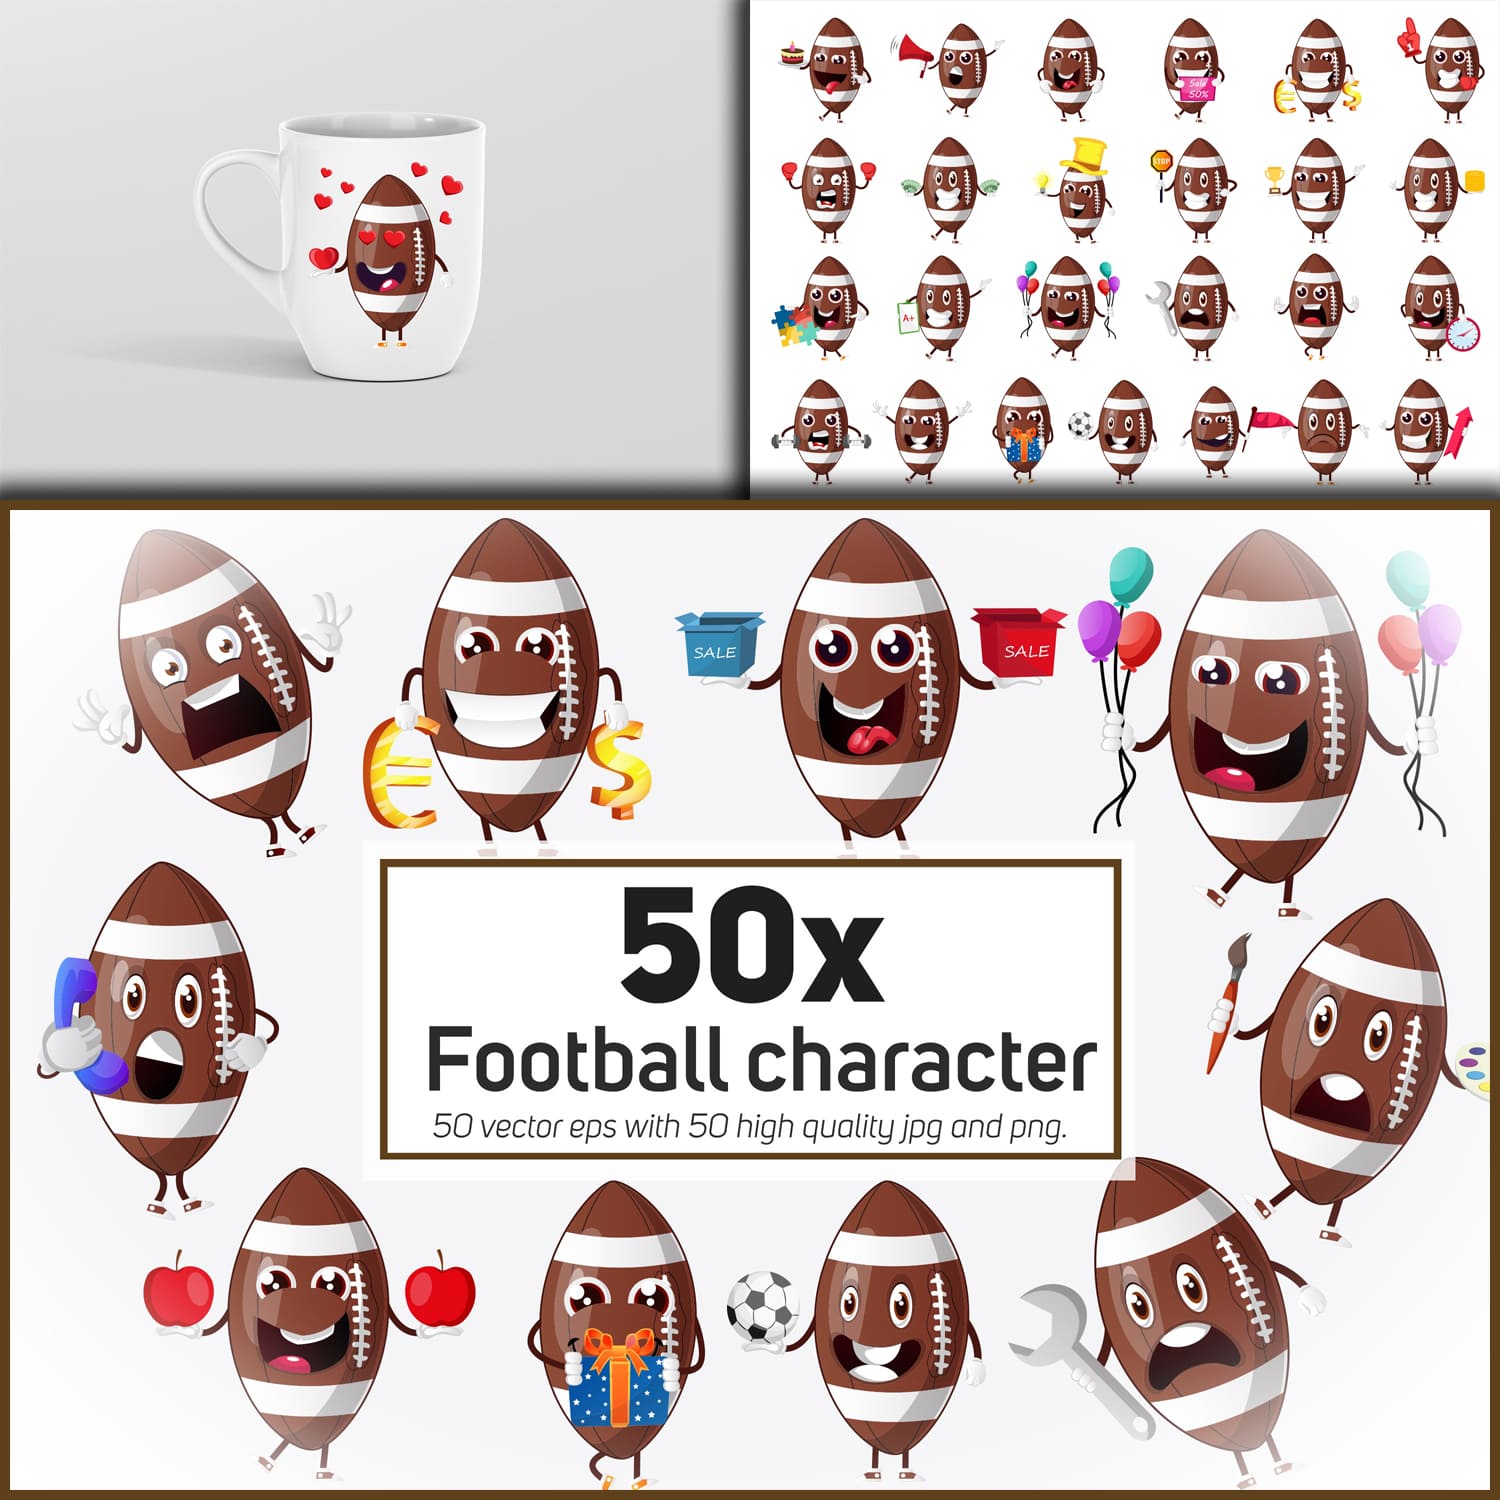 Preview 50x football mascot or character in different situ.